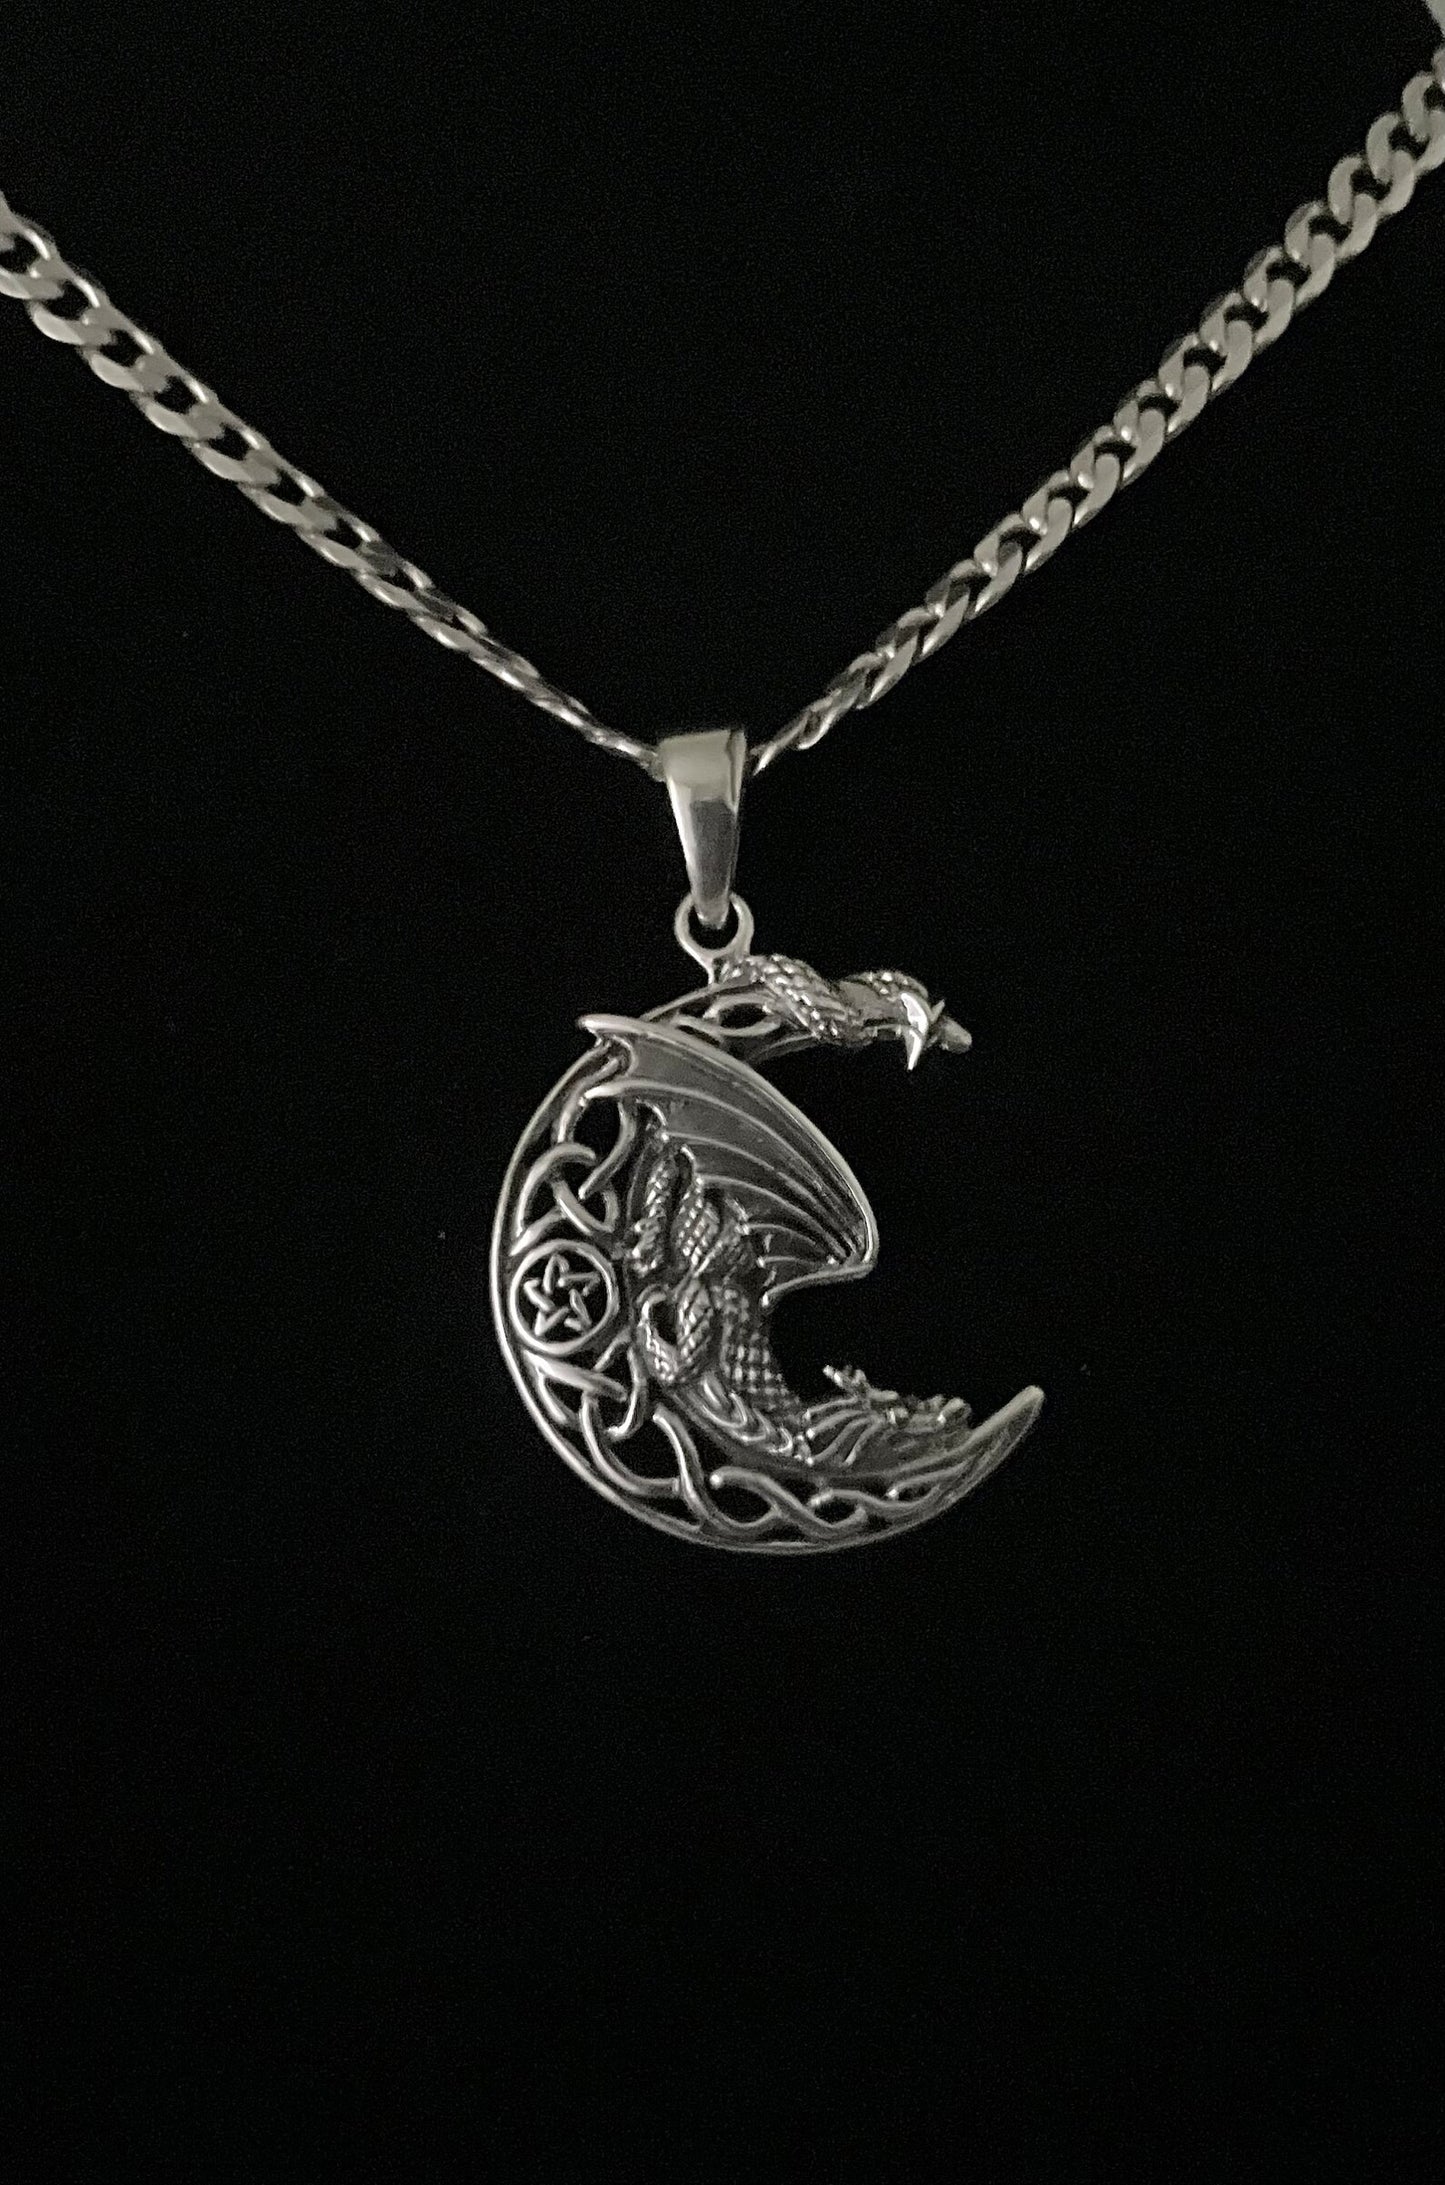 Large 925 Sterling Silver Medieval Dragon wrapped around Celtic Crescent Moon Pendant + Free Chain